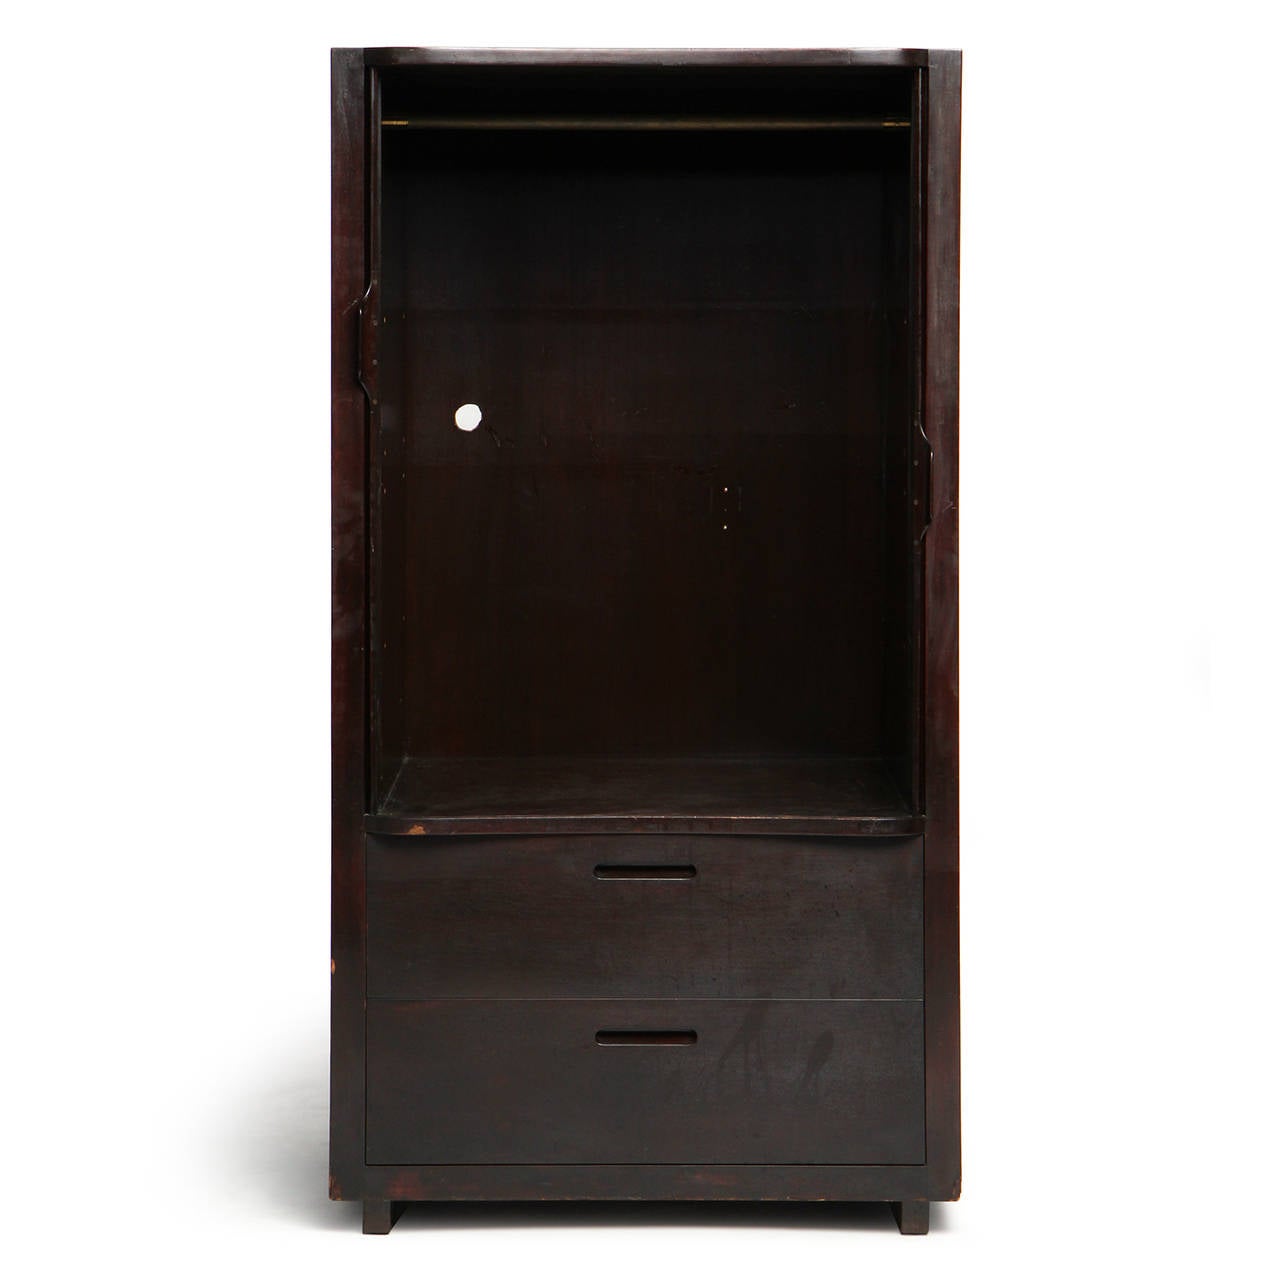 A simple and refined ebonized mahogany wardrobe having tambour doors with integrated handles a top two (2) drawers with cut out handles.